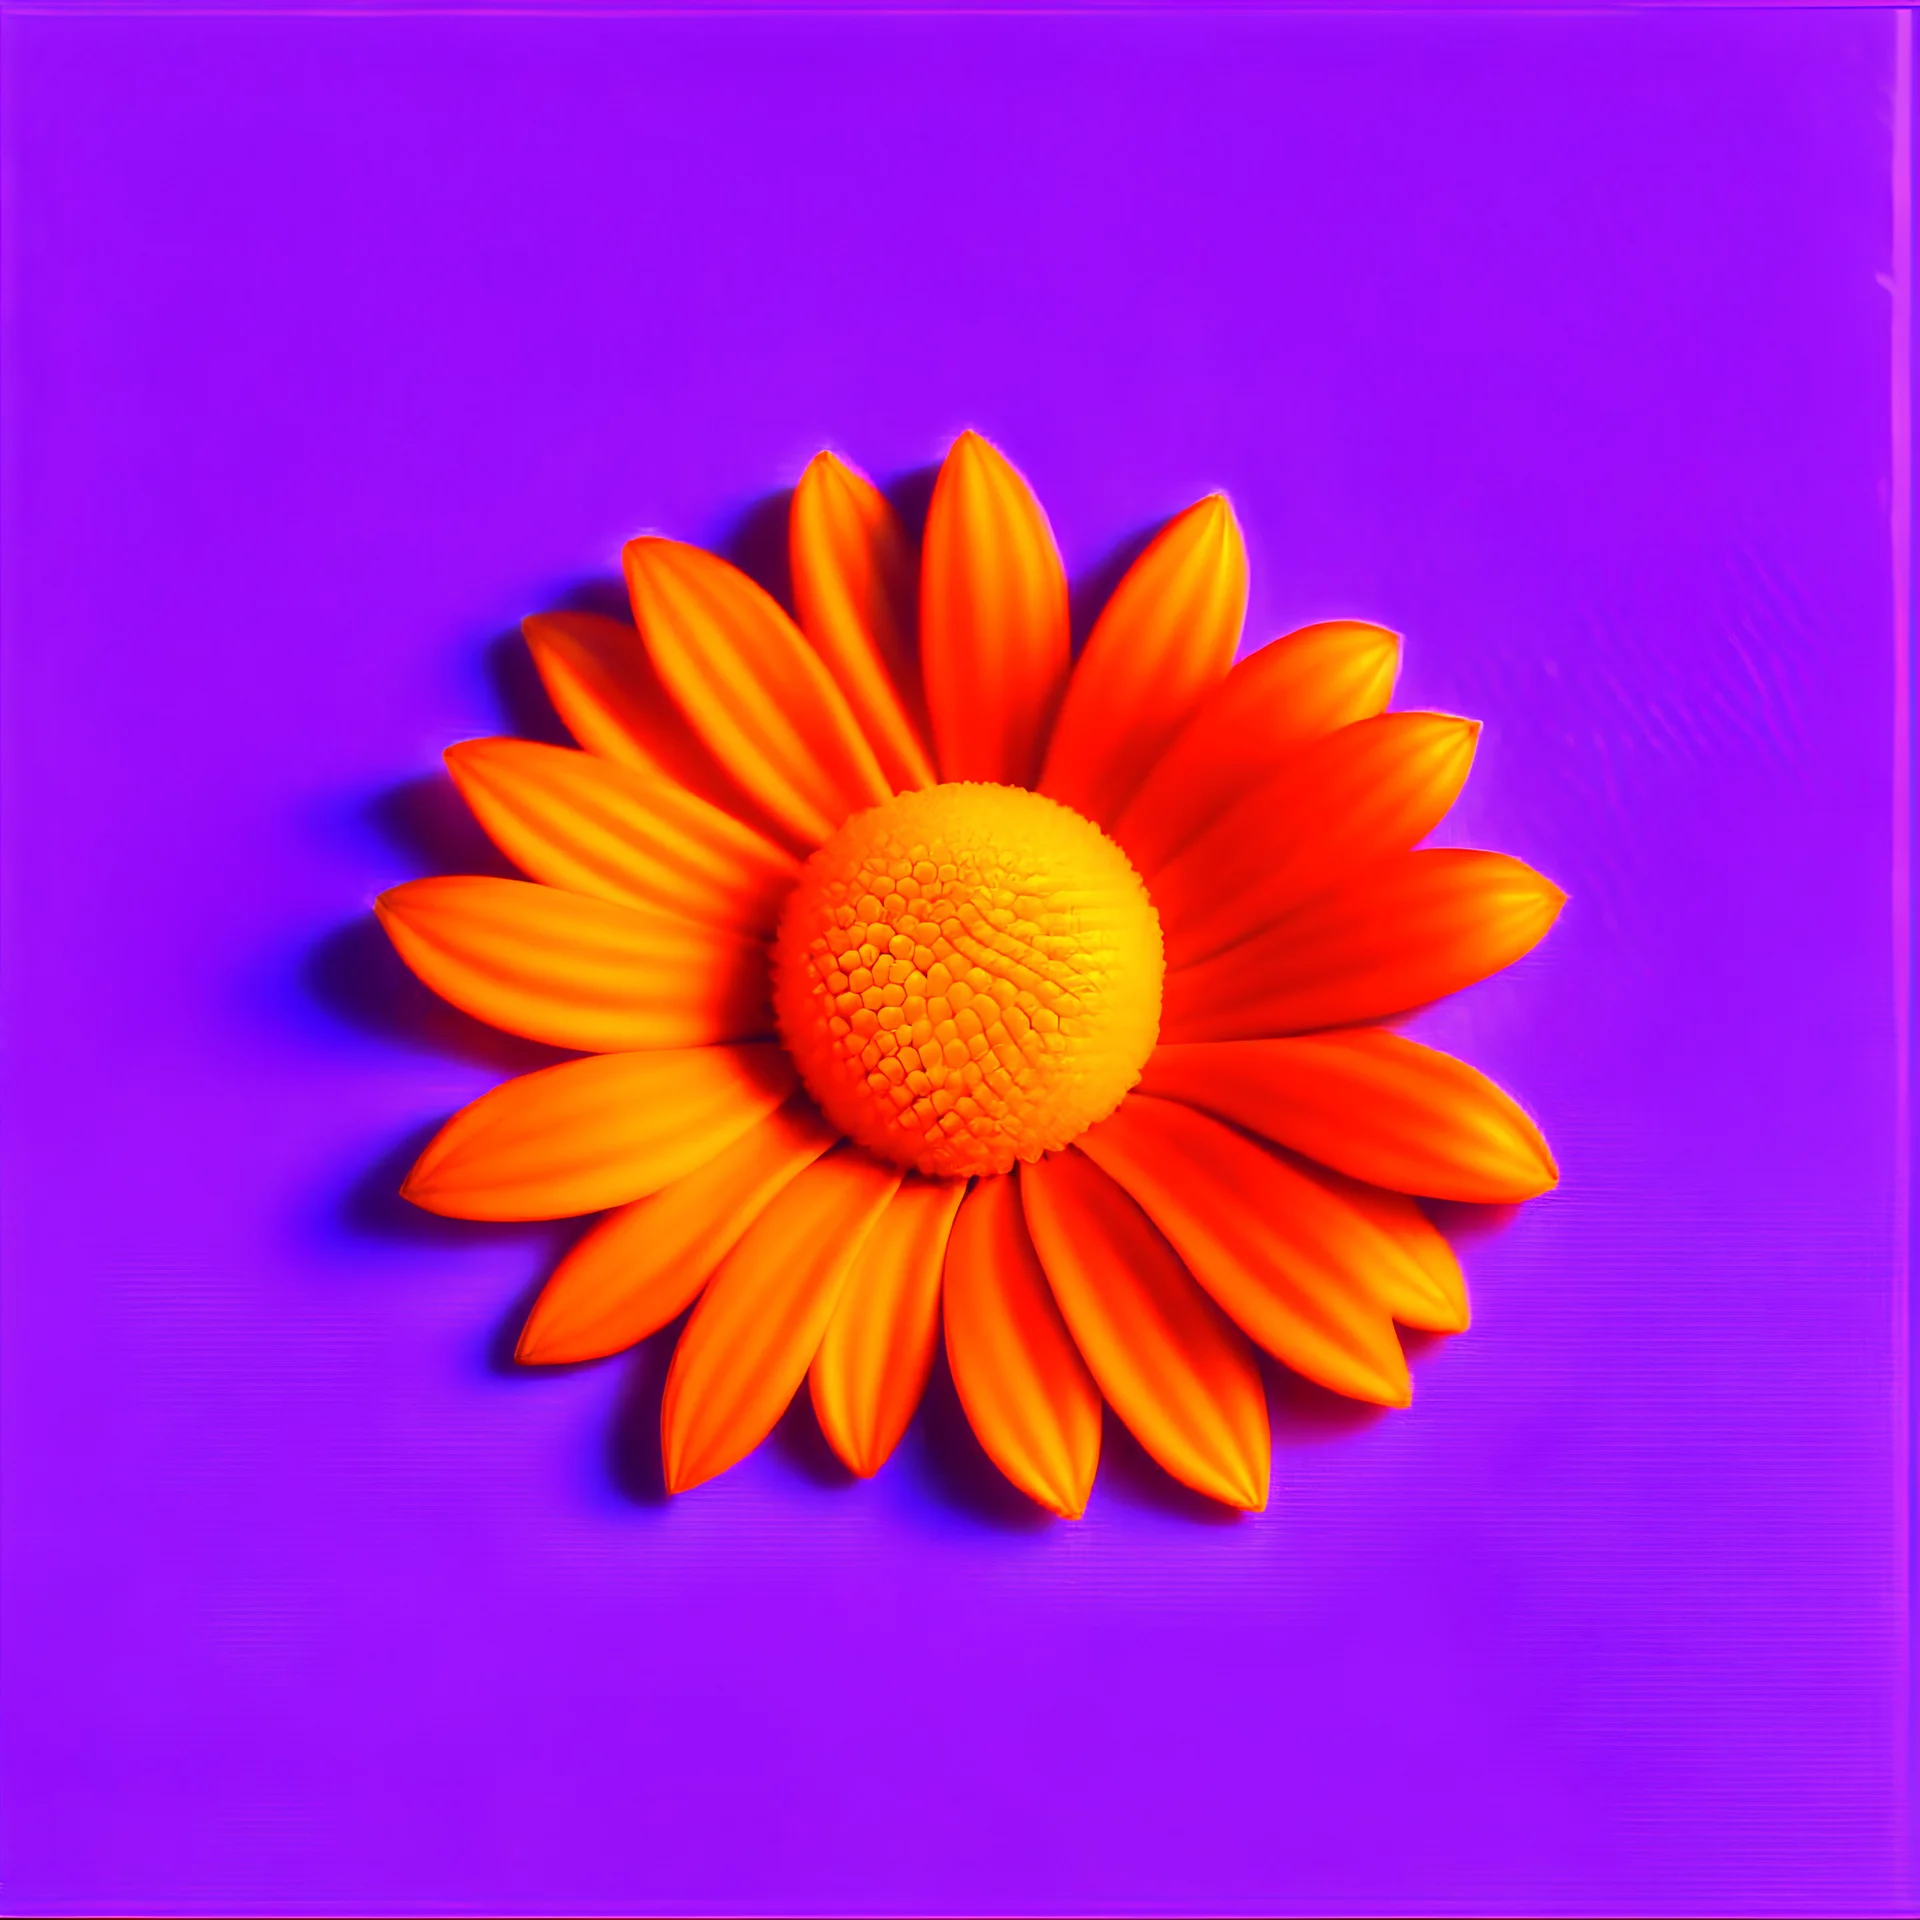 an orange flower laying on a purple surface